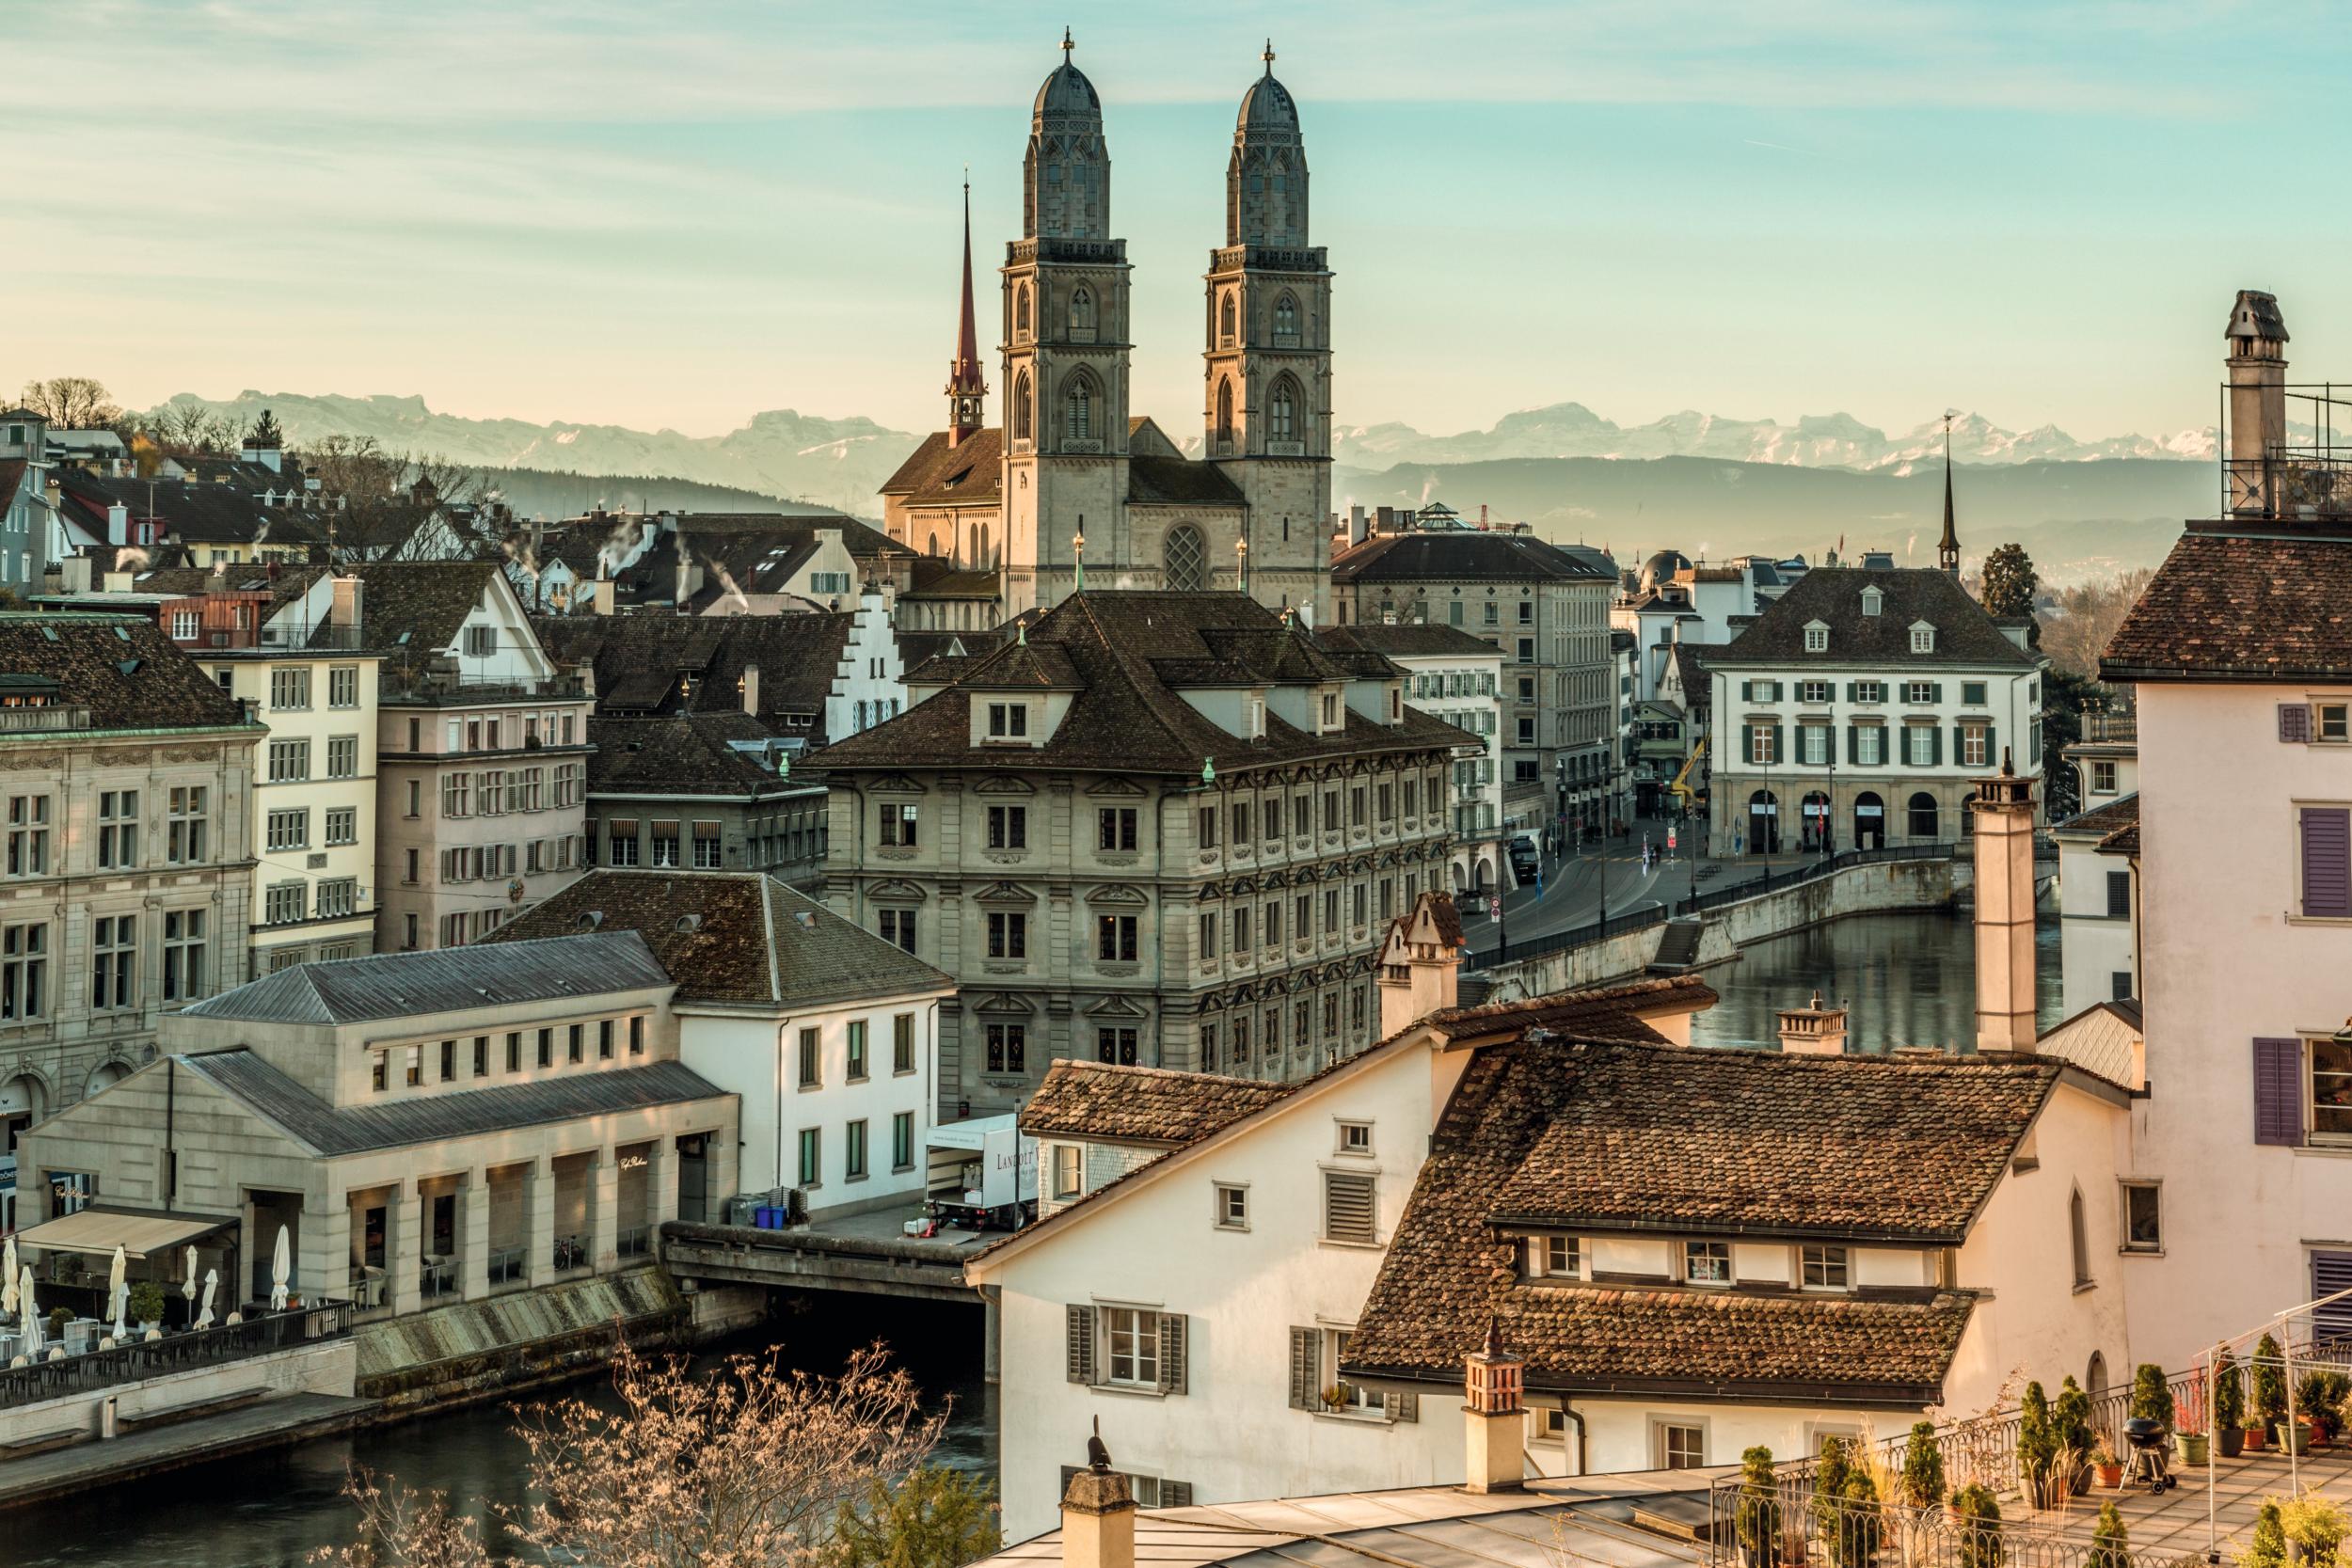 Take a meandering walk around Zurich’s Old Town and get to know the city